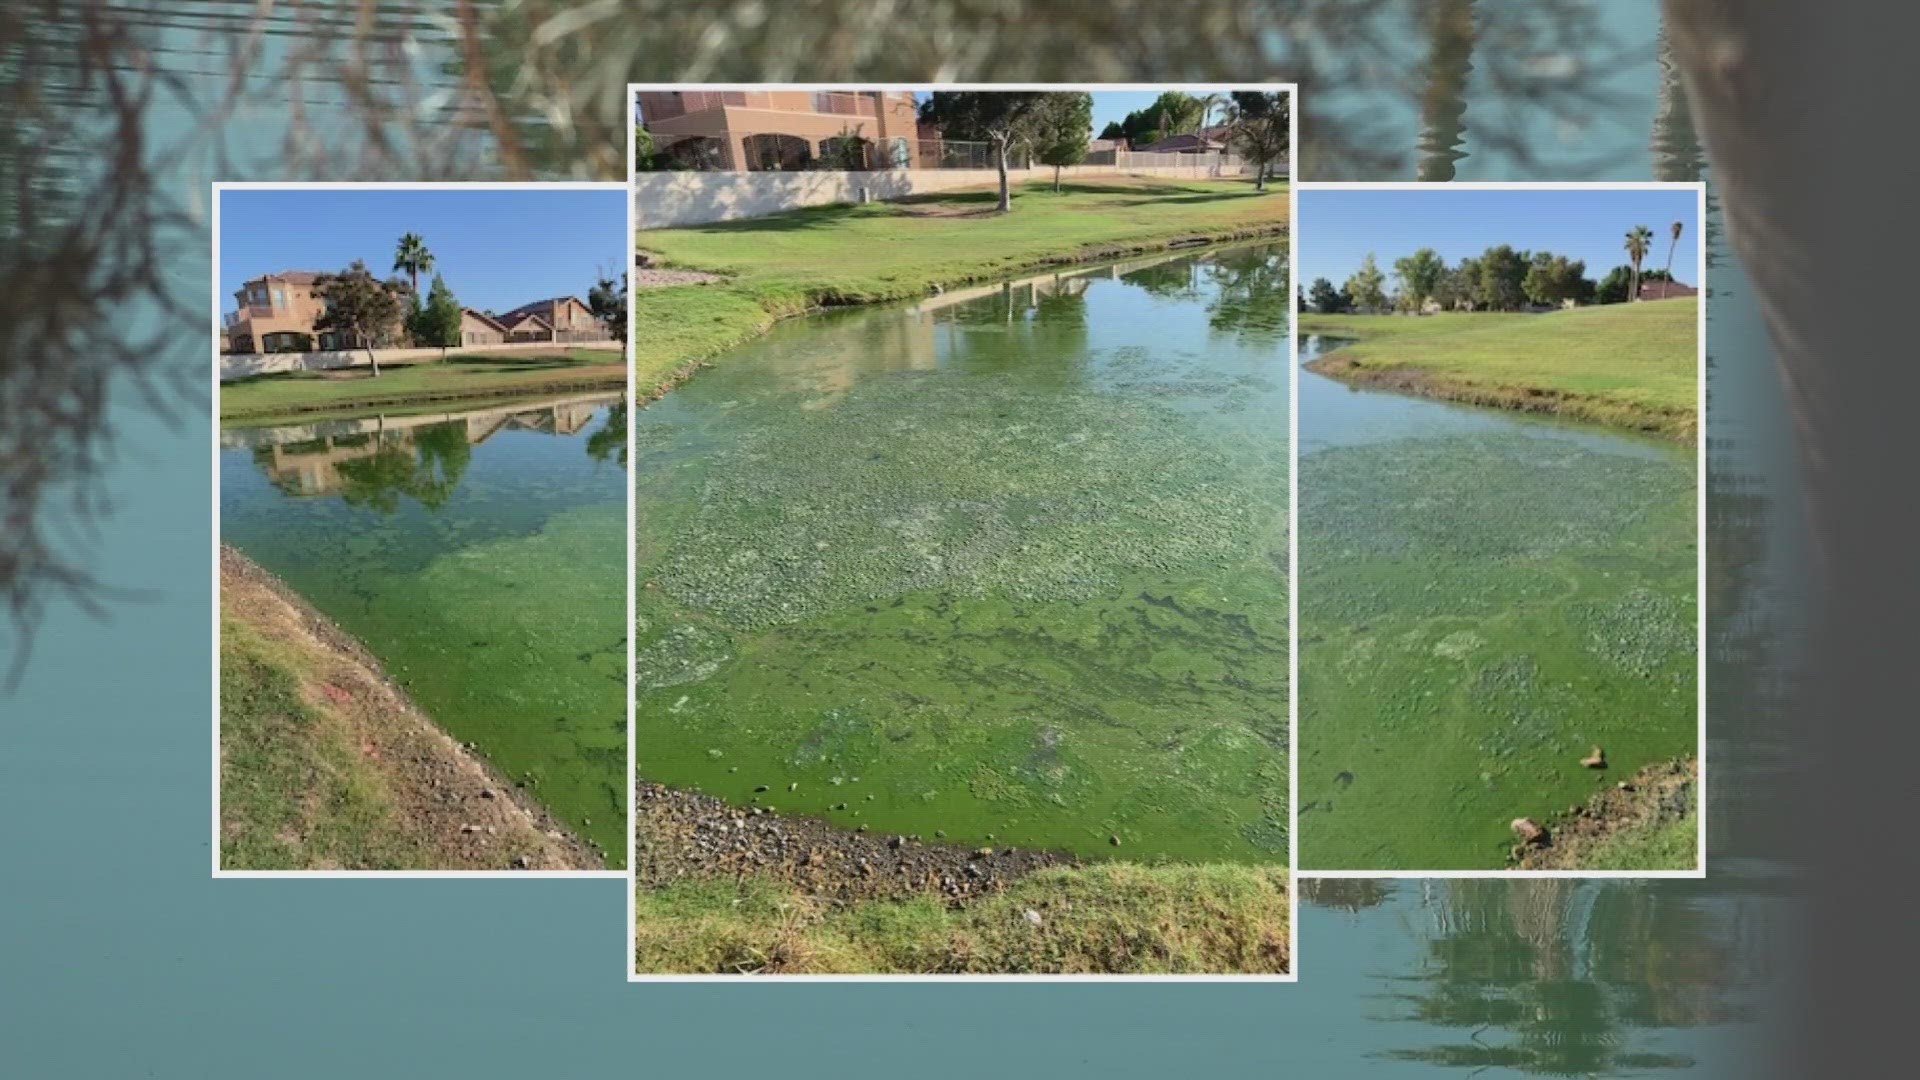 A stench coming from a pond at the Arrowhead Country Club in Glendale has led to complaints from people in a nearby neighborhood and now criminal charges for one man